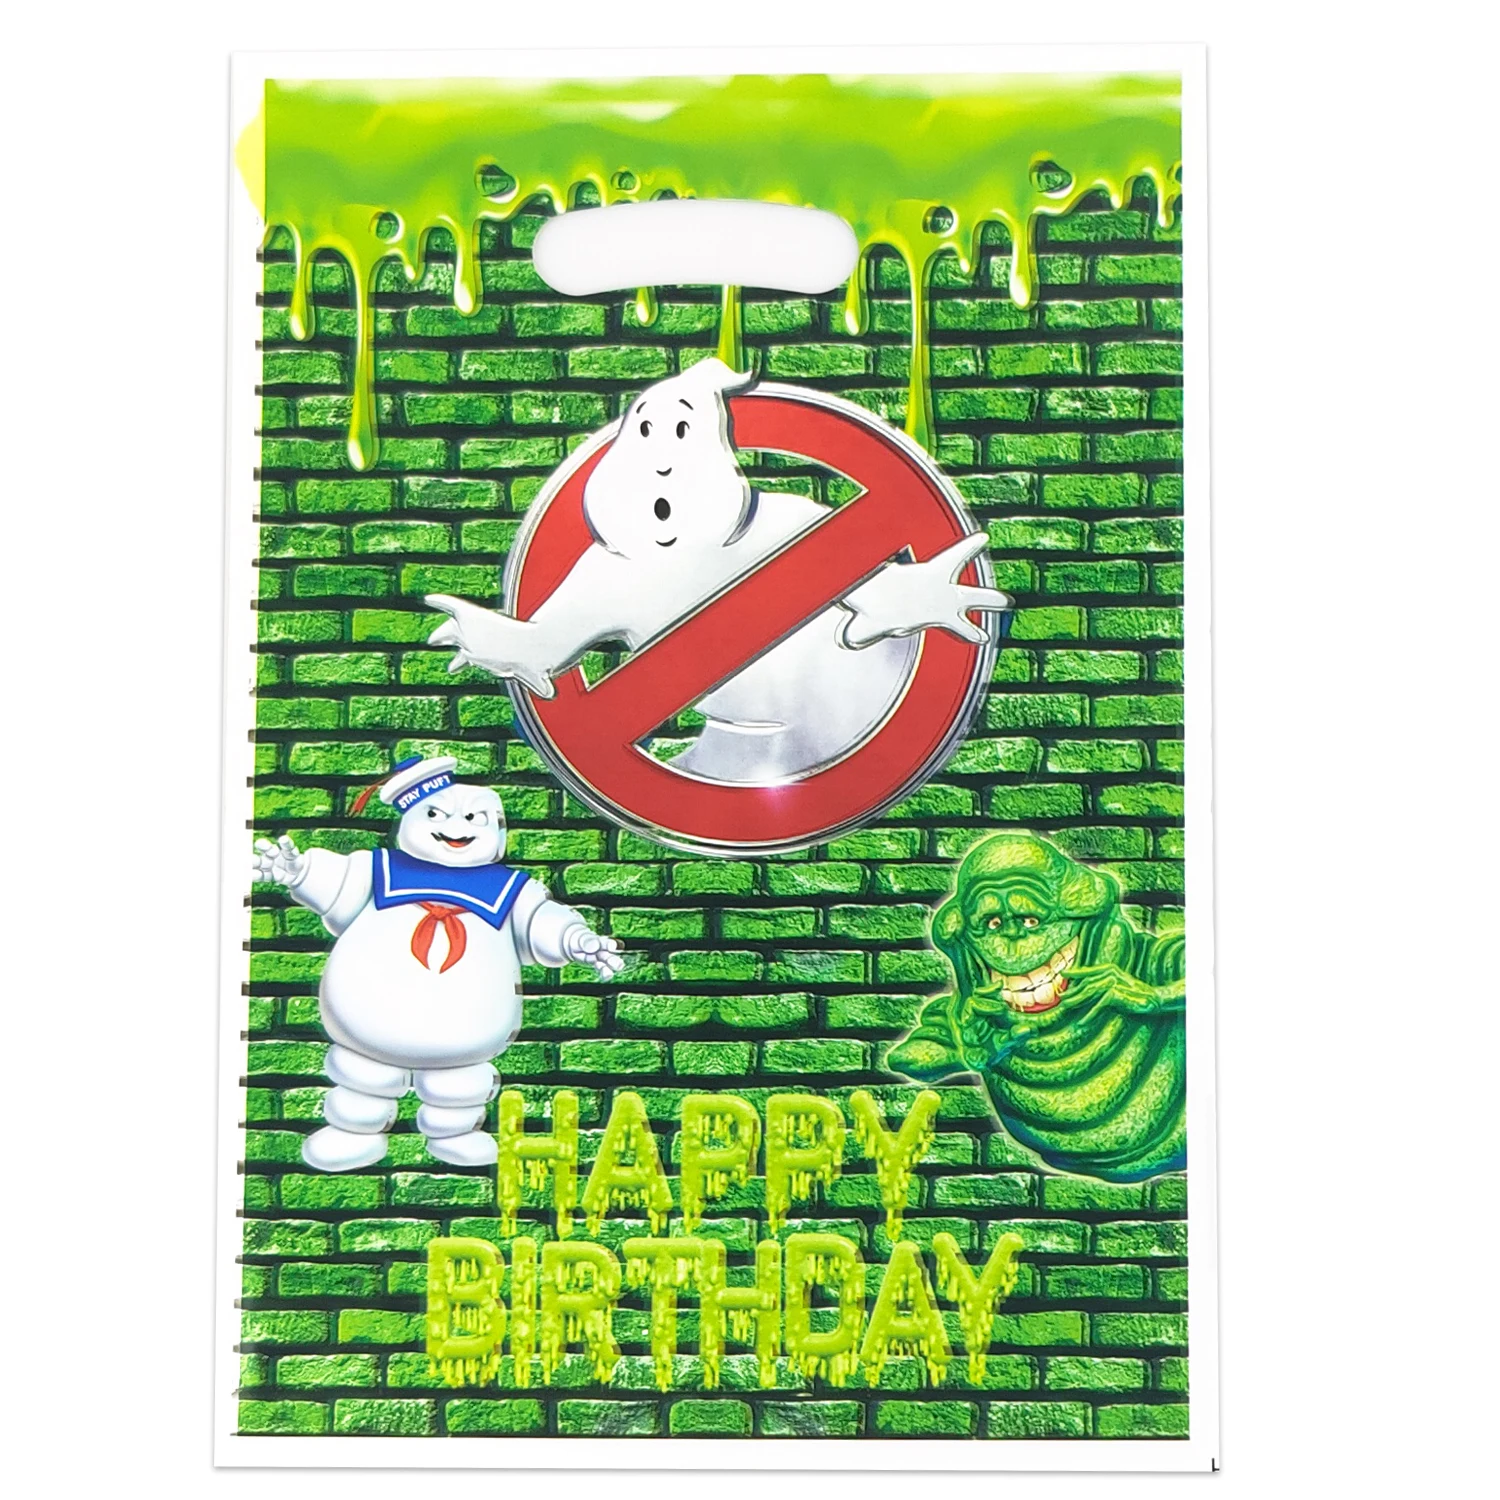 10pcs/lot Kids Boys Favors Happy Birthday Party Gifts Ghostbusting Theme Surprise Candy Bags Decorations Loot Bags